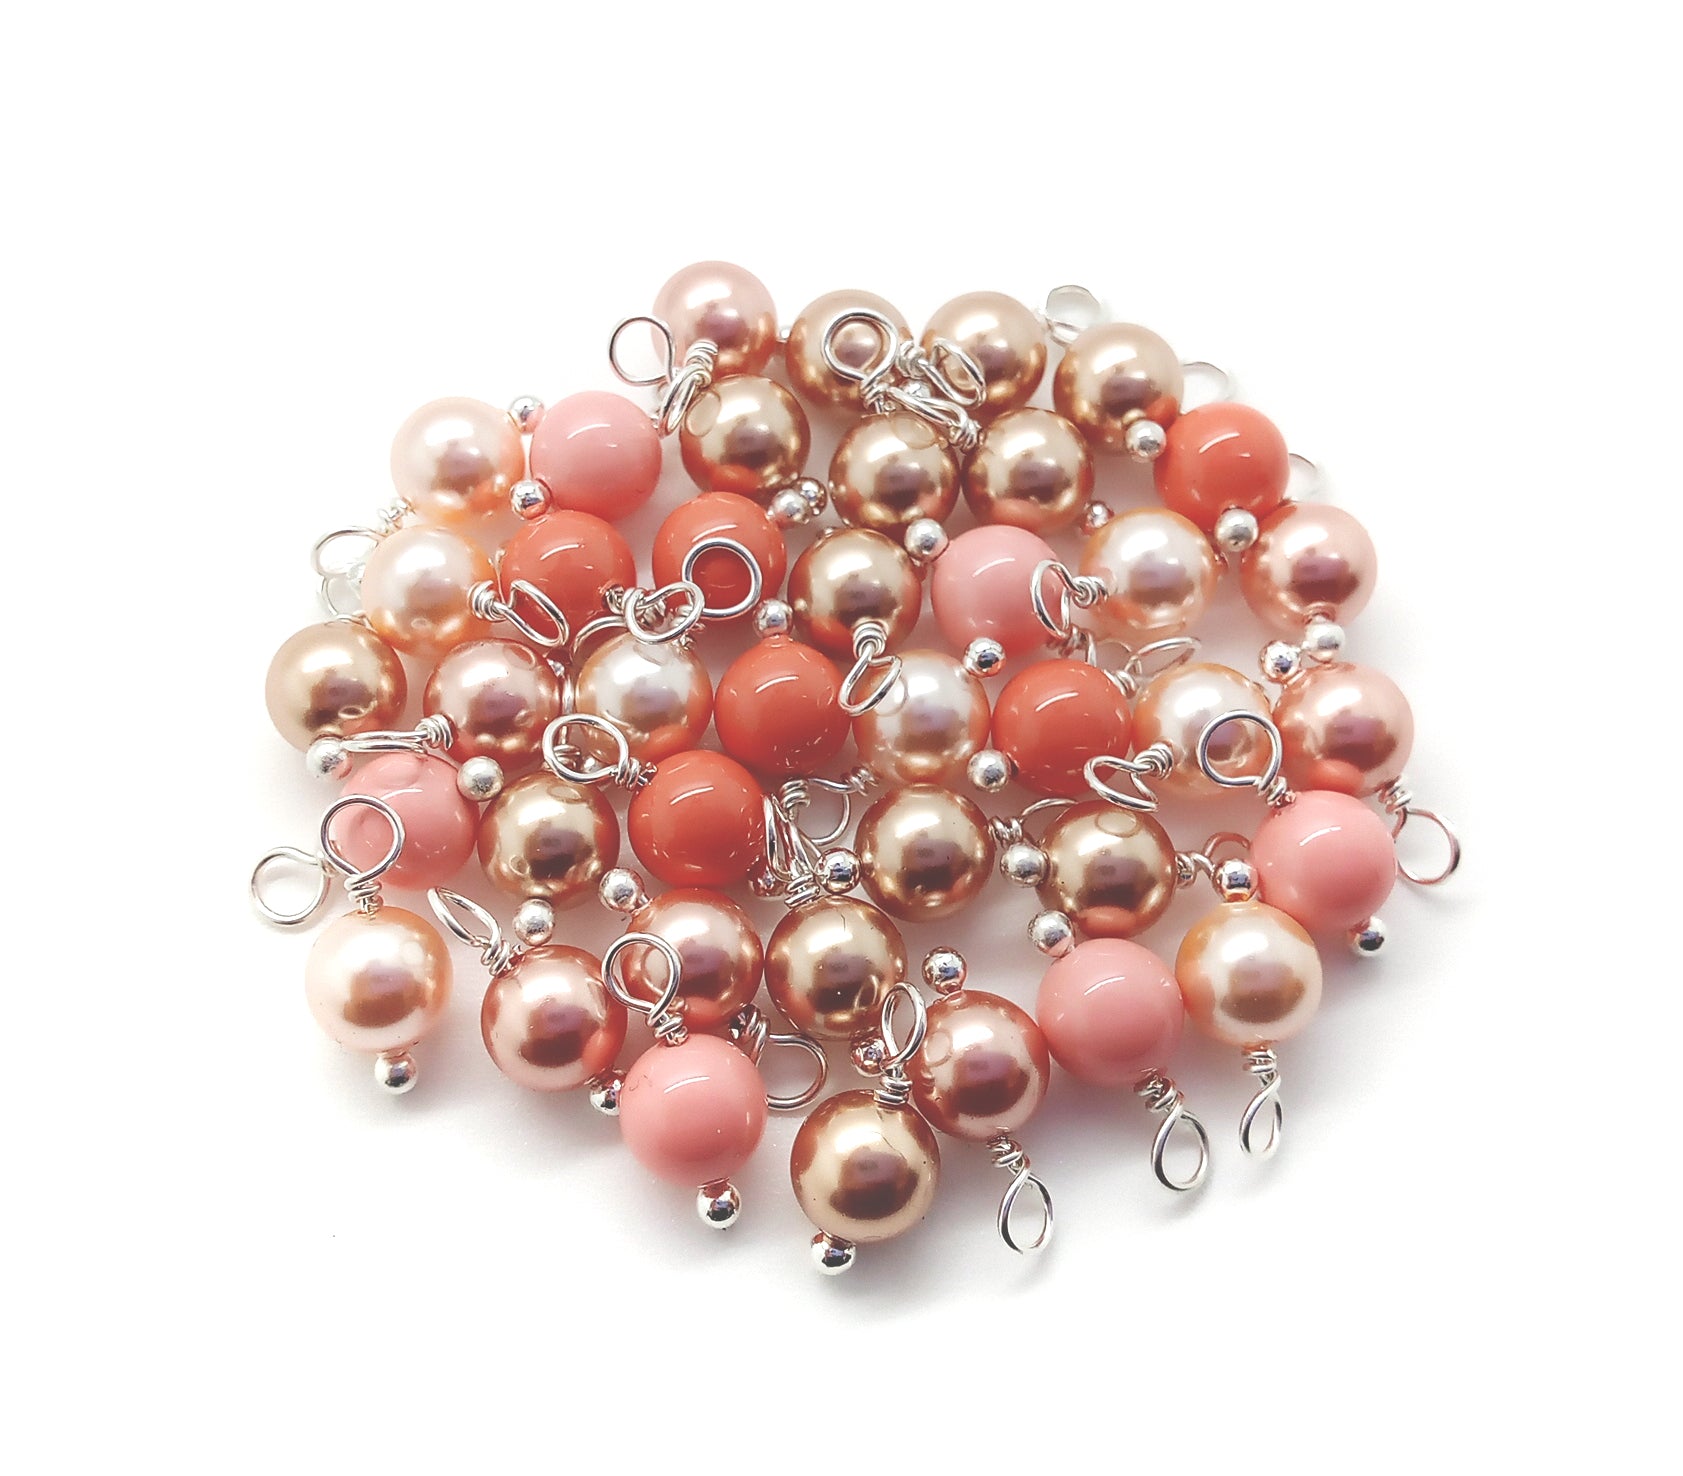 Crystal Charms Mix, 20pc Peach and Pink Pearl Dangles